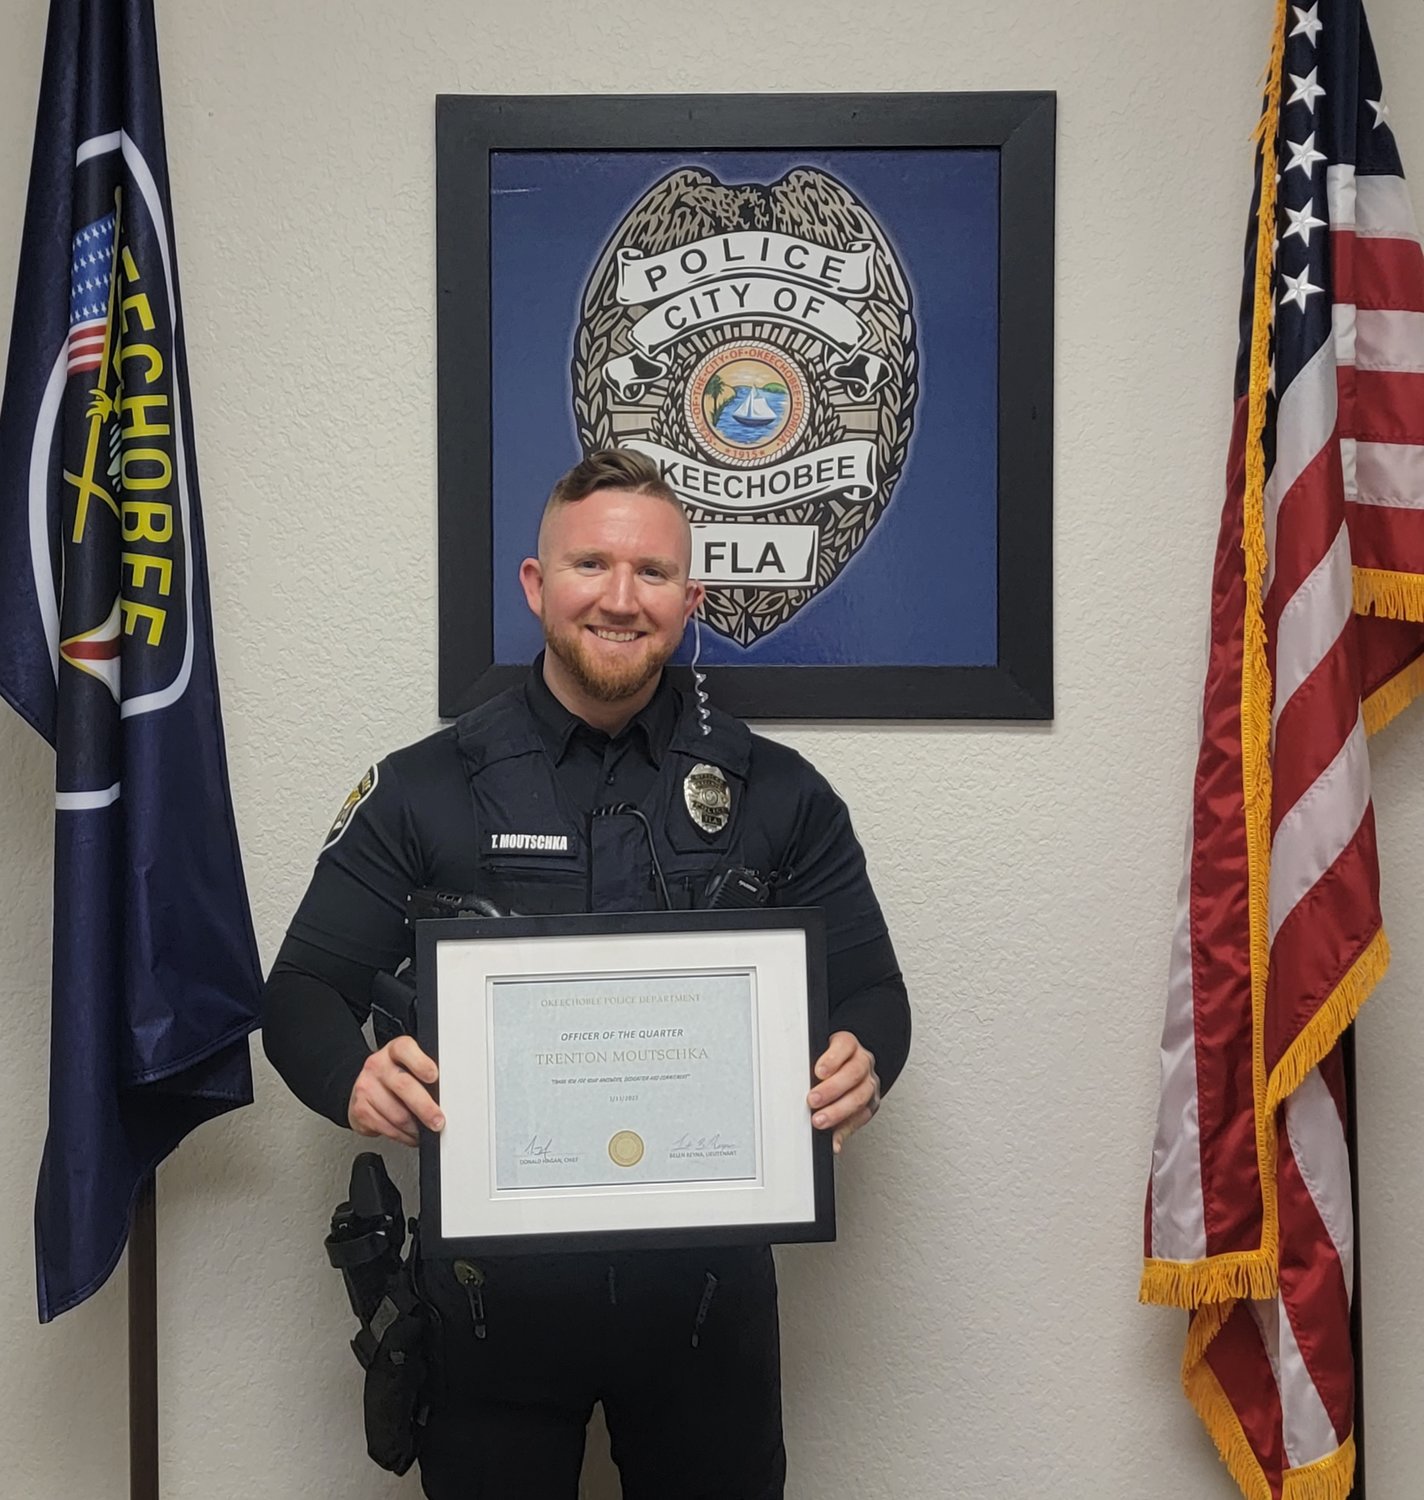 Officer Trenton Moutschka was nominated for Officer of the Quarter by his peers.